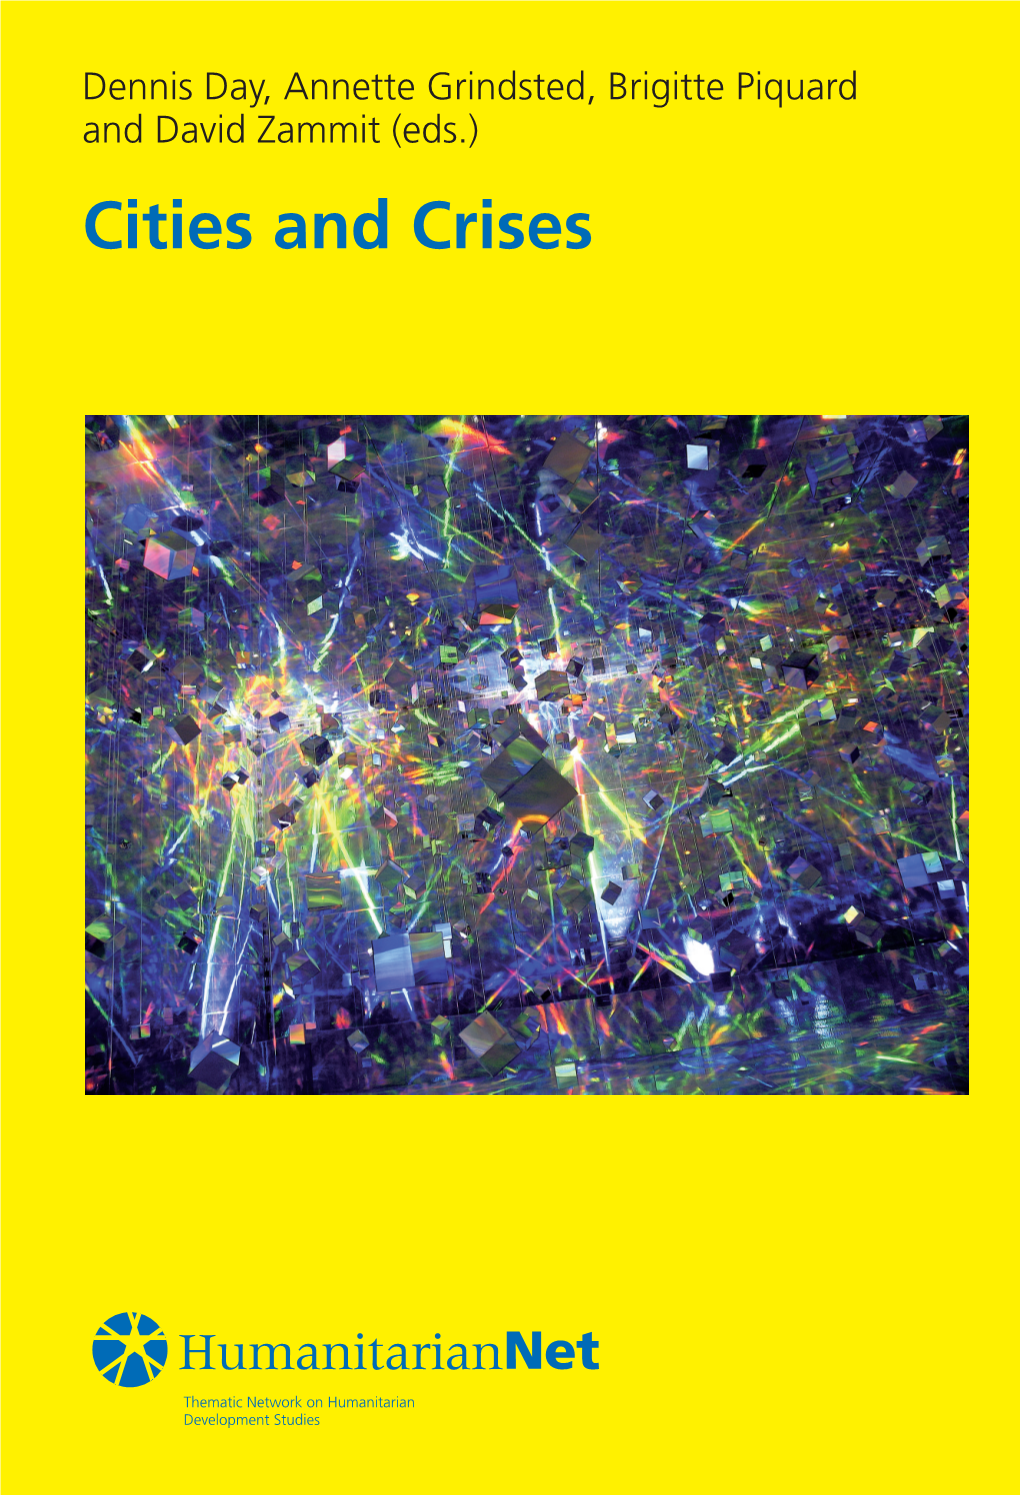 Cities and Crises Cities and Crises Dennis Day, Annette Grindsted, Brigitte Piquard and David Zammit (Eds.) Annette Grindsted, Brigitte Piquard Dennis Day